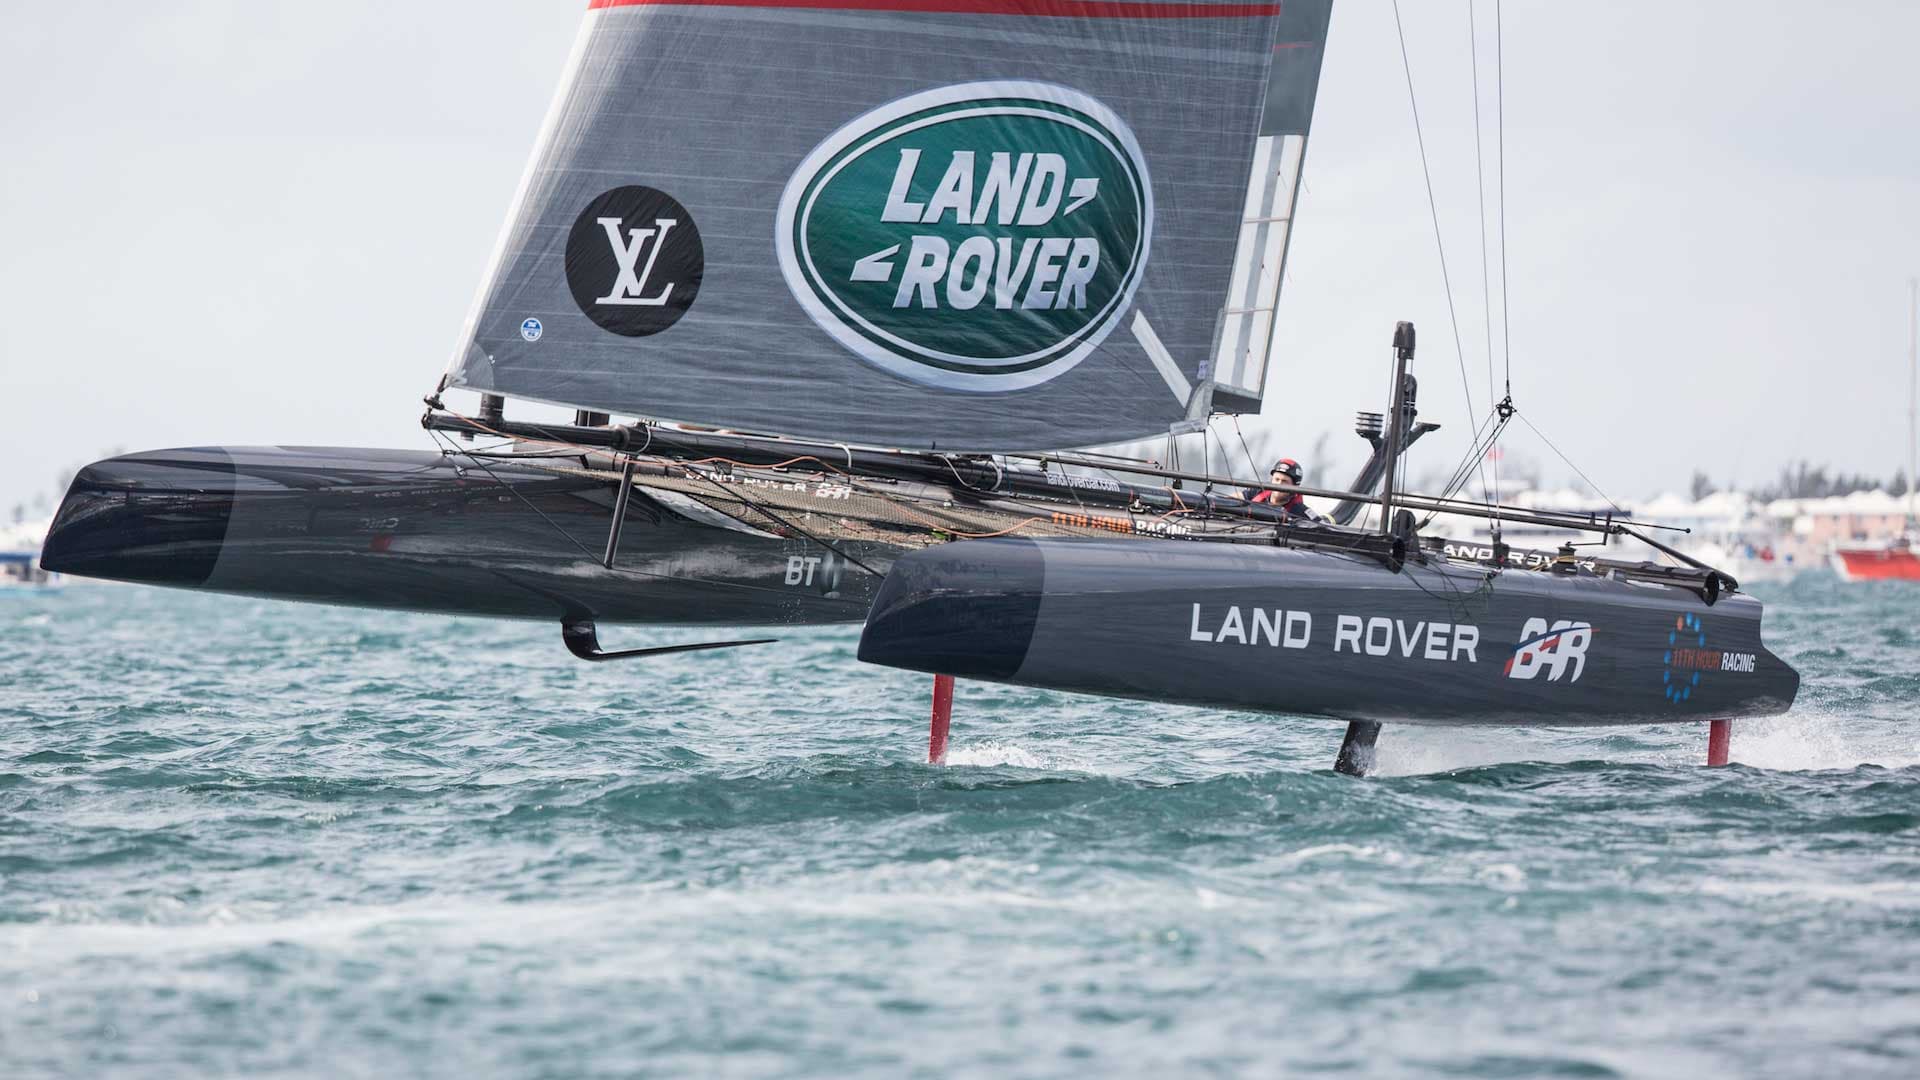 America’s Cup Racing Is the Most Extreme Sport on Earth